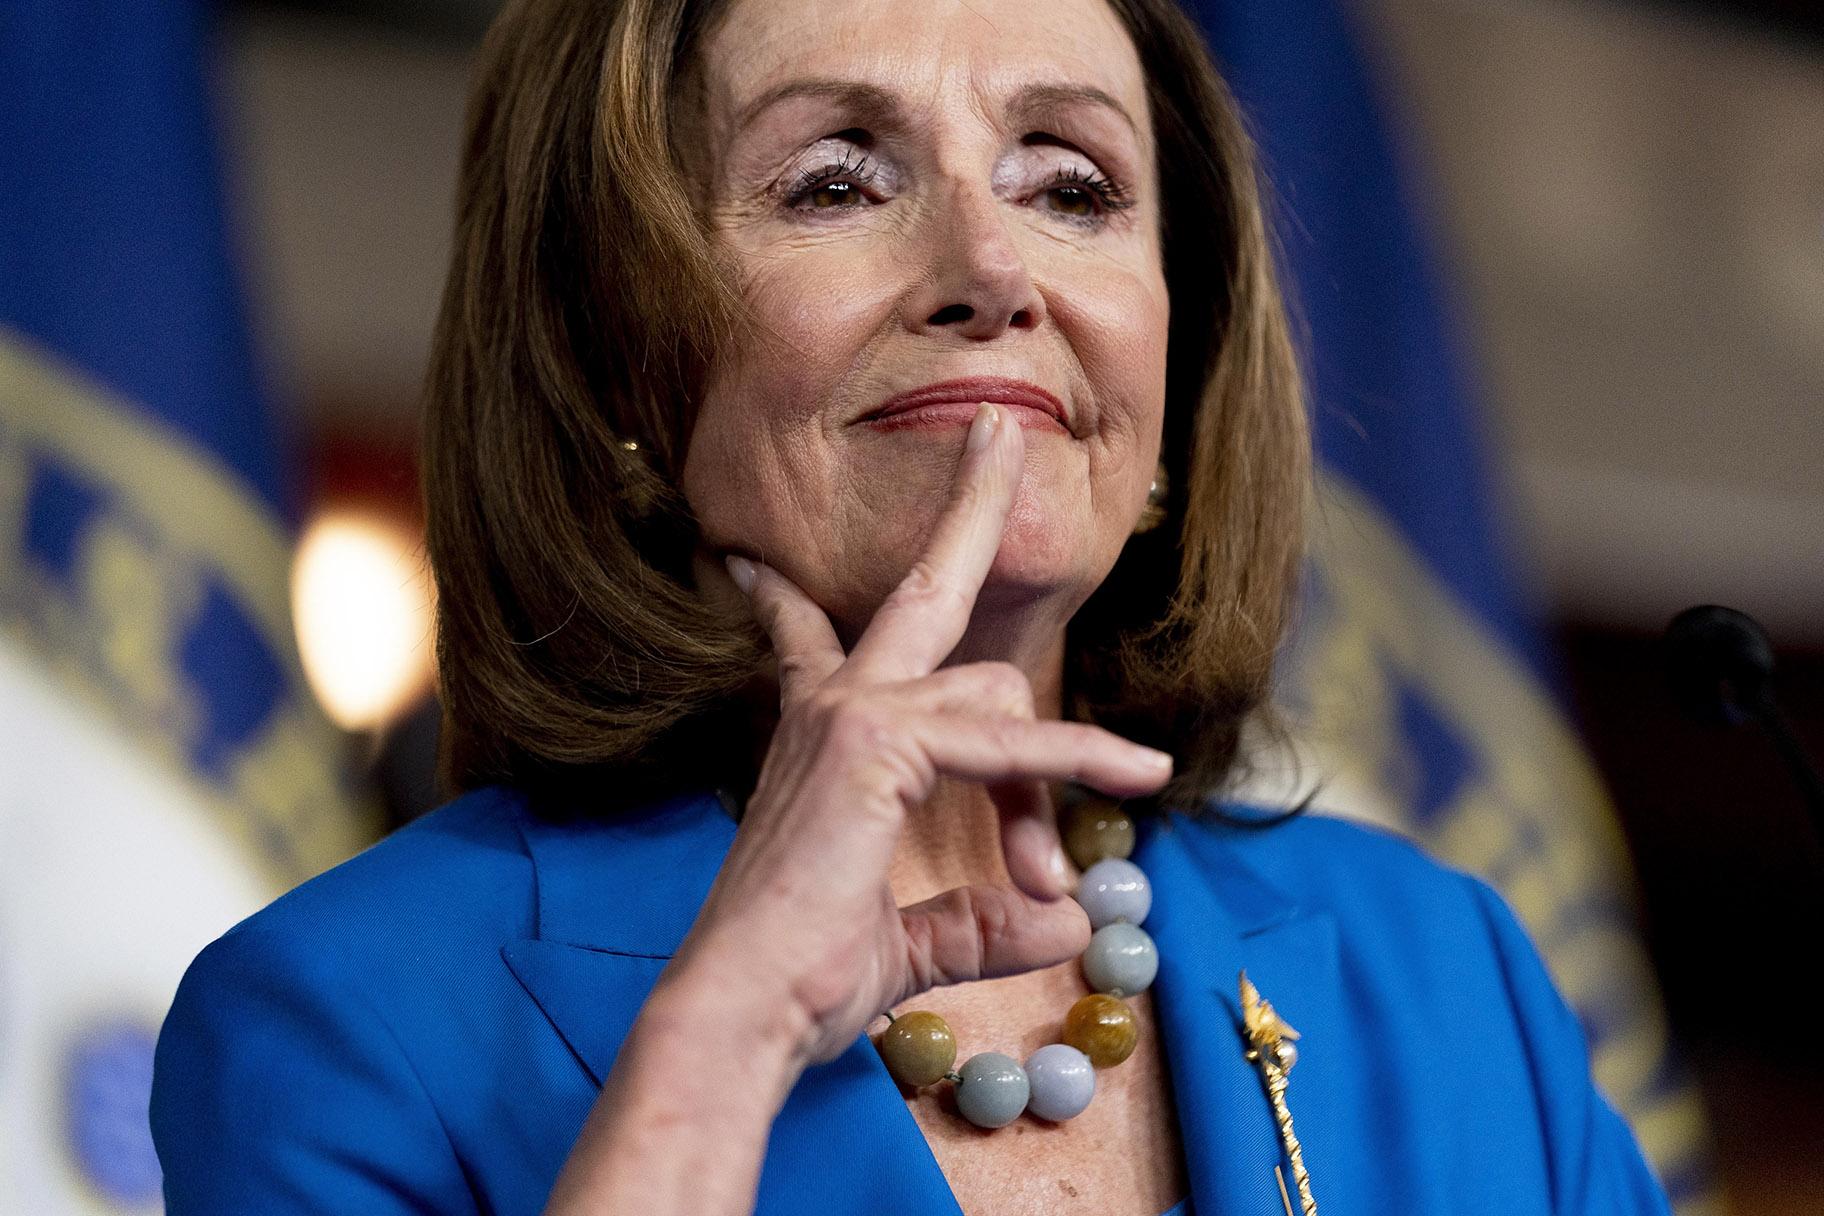 House Speaker Nancy Pelosi of Calif. reacts as she listens to a question from a reporter during her weekly press briefing on Capitol Hill, Thursday, Sept. 30, 2021, in Washington. (AP Photo / Andrew Harnik)